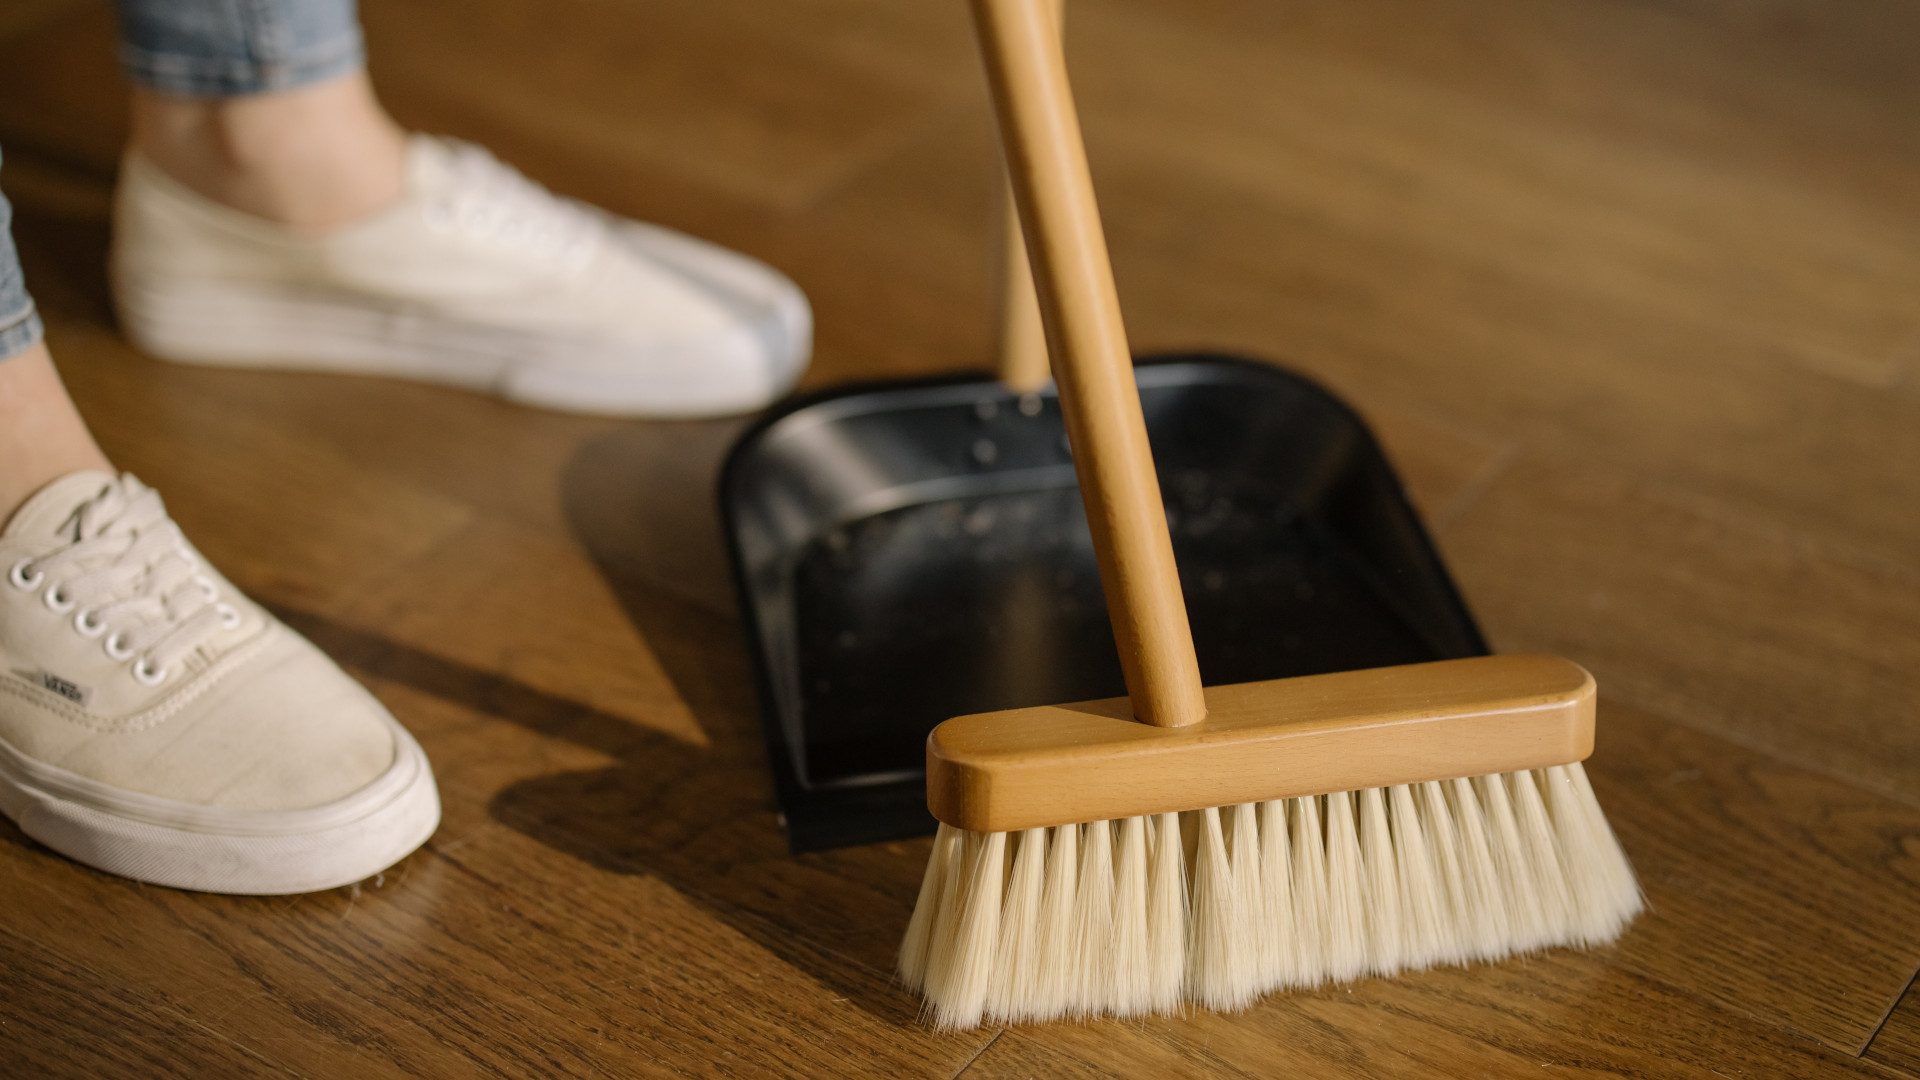 23 Things Everyone Forgets To Clean!